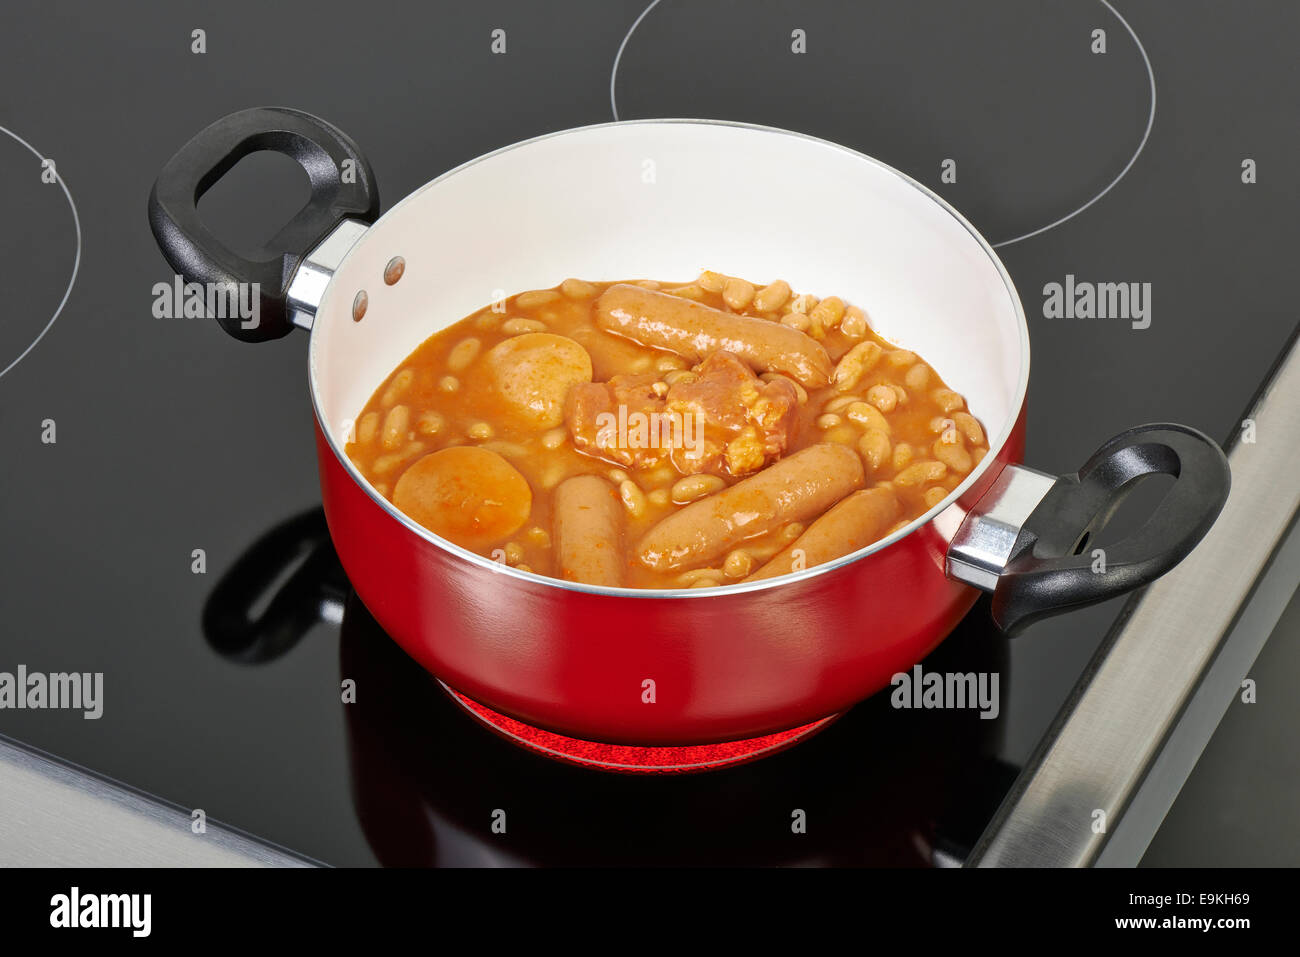 Preparing cassoulet in red ceramic pan without cover on Electric hob in modern and domestic kitchen Stock Photo